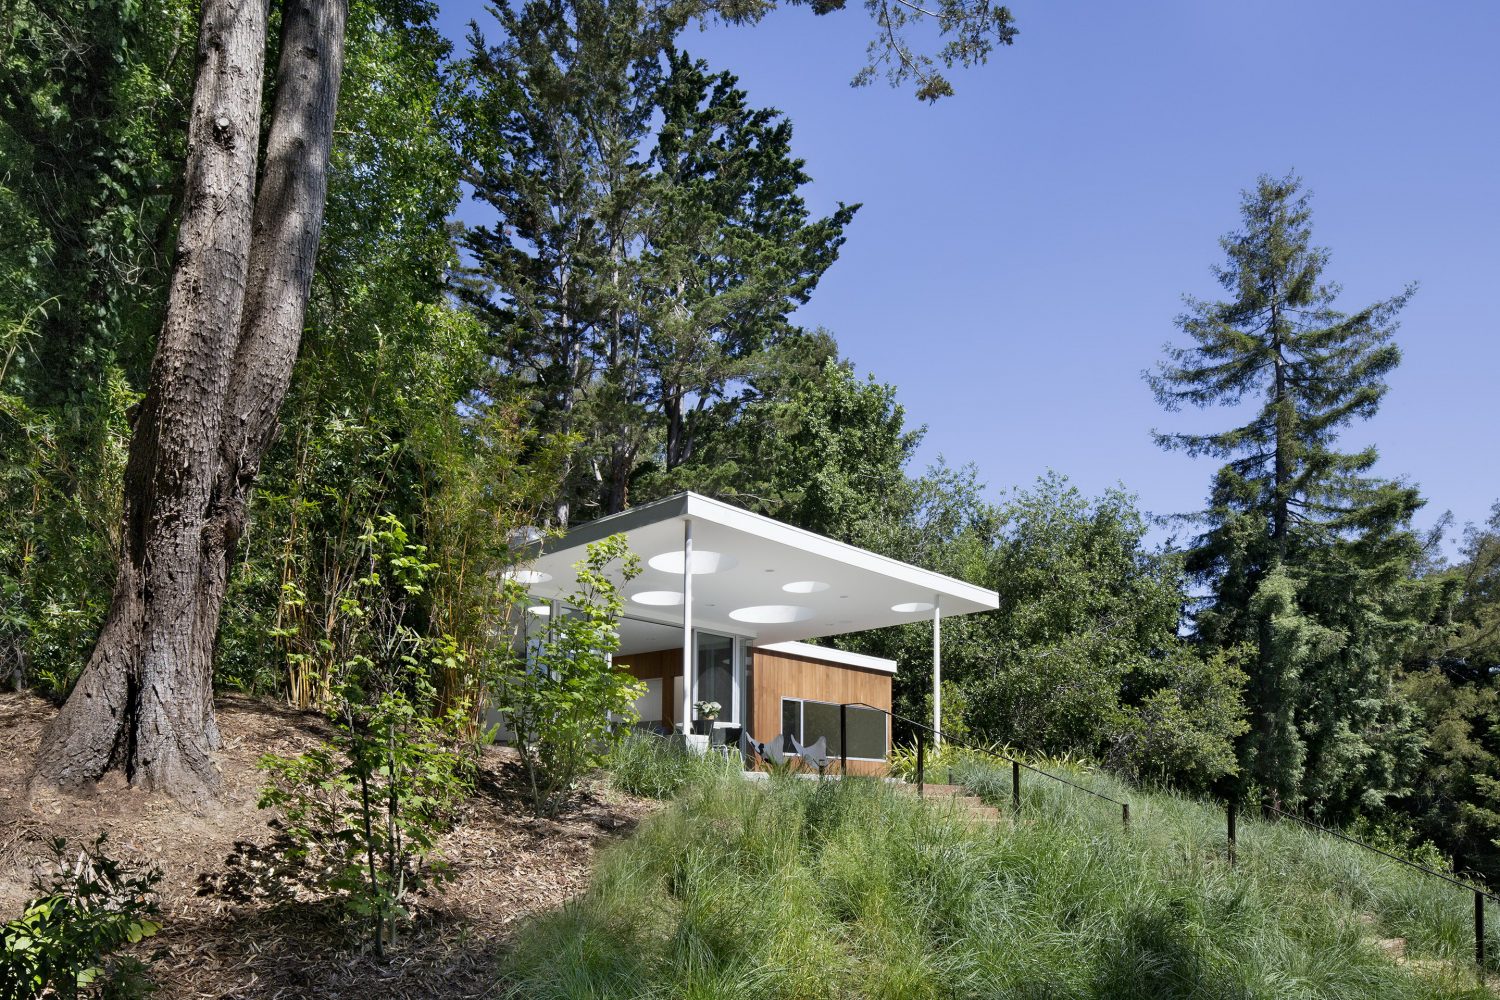 Mill Valley Guesthouse by Turnbull Griffin Haesloop Architects